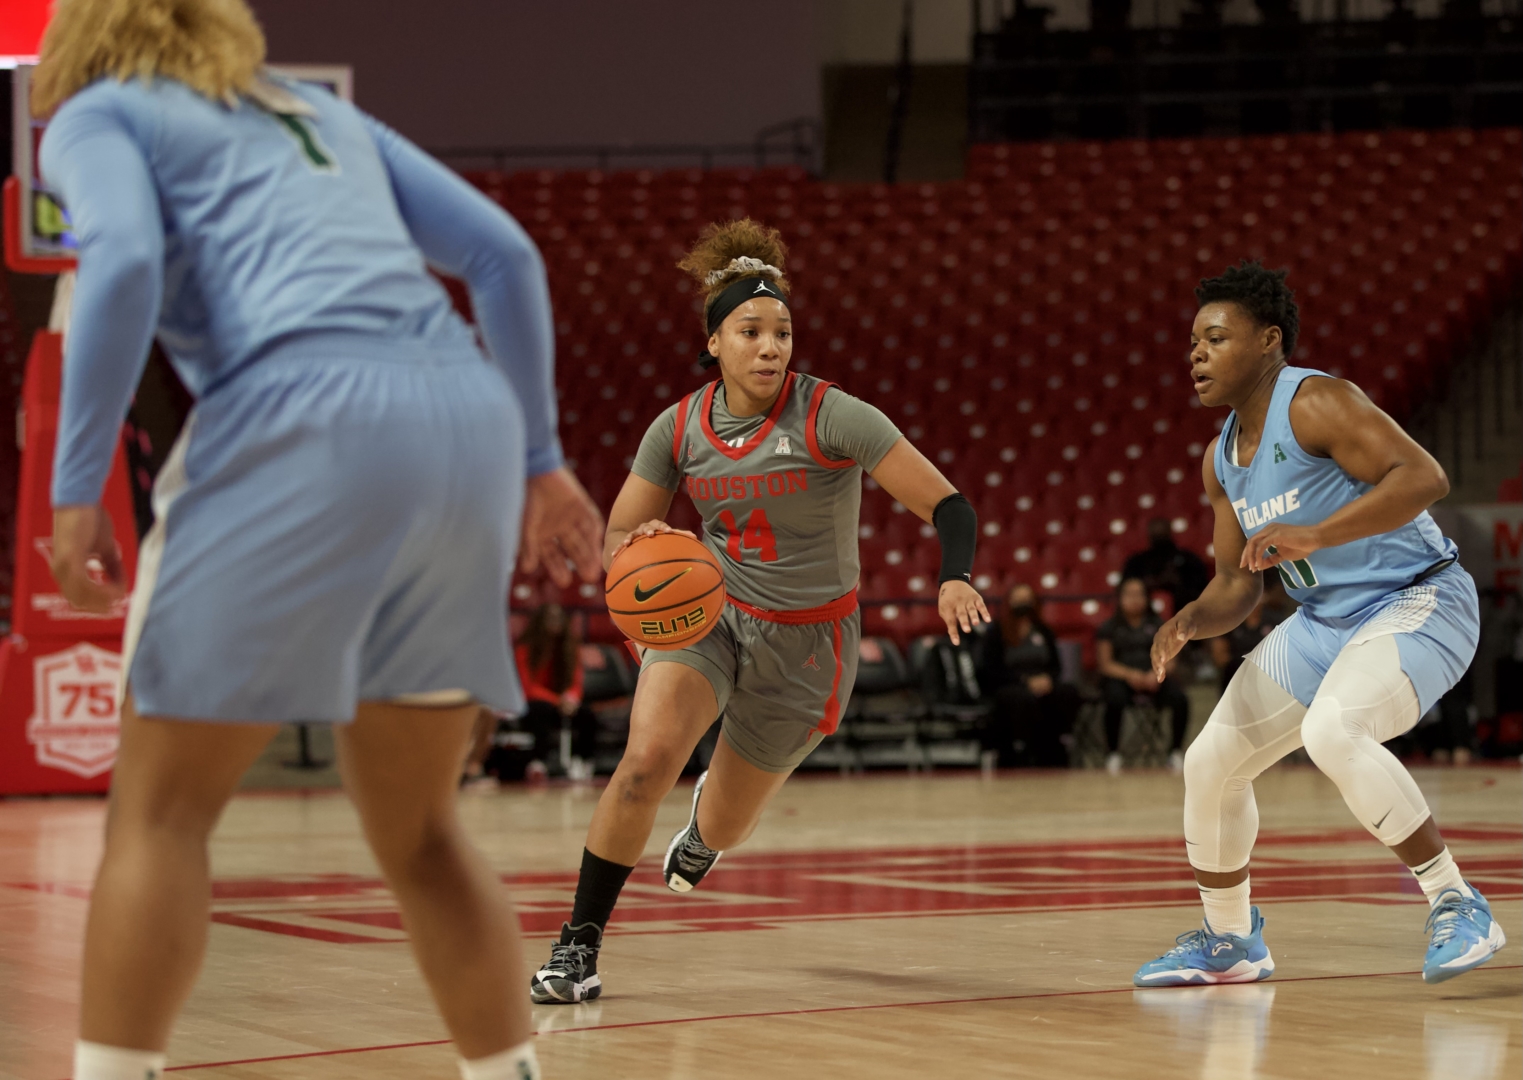 Sophomore guard Laila Blair led the UH women's basketball team with 13 points in the Cougars' loss to Tulane on Monday afternoon at Fertitta Center. | Sean Thomas/The Cougar